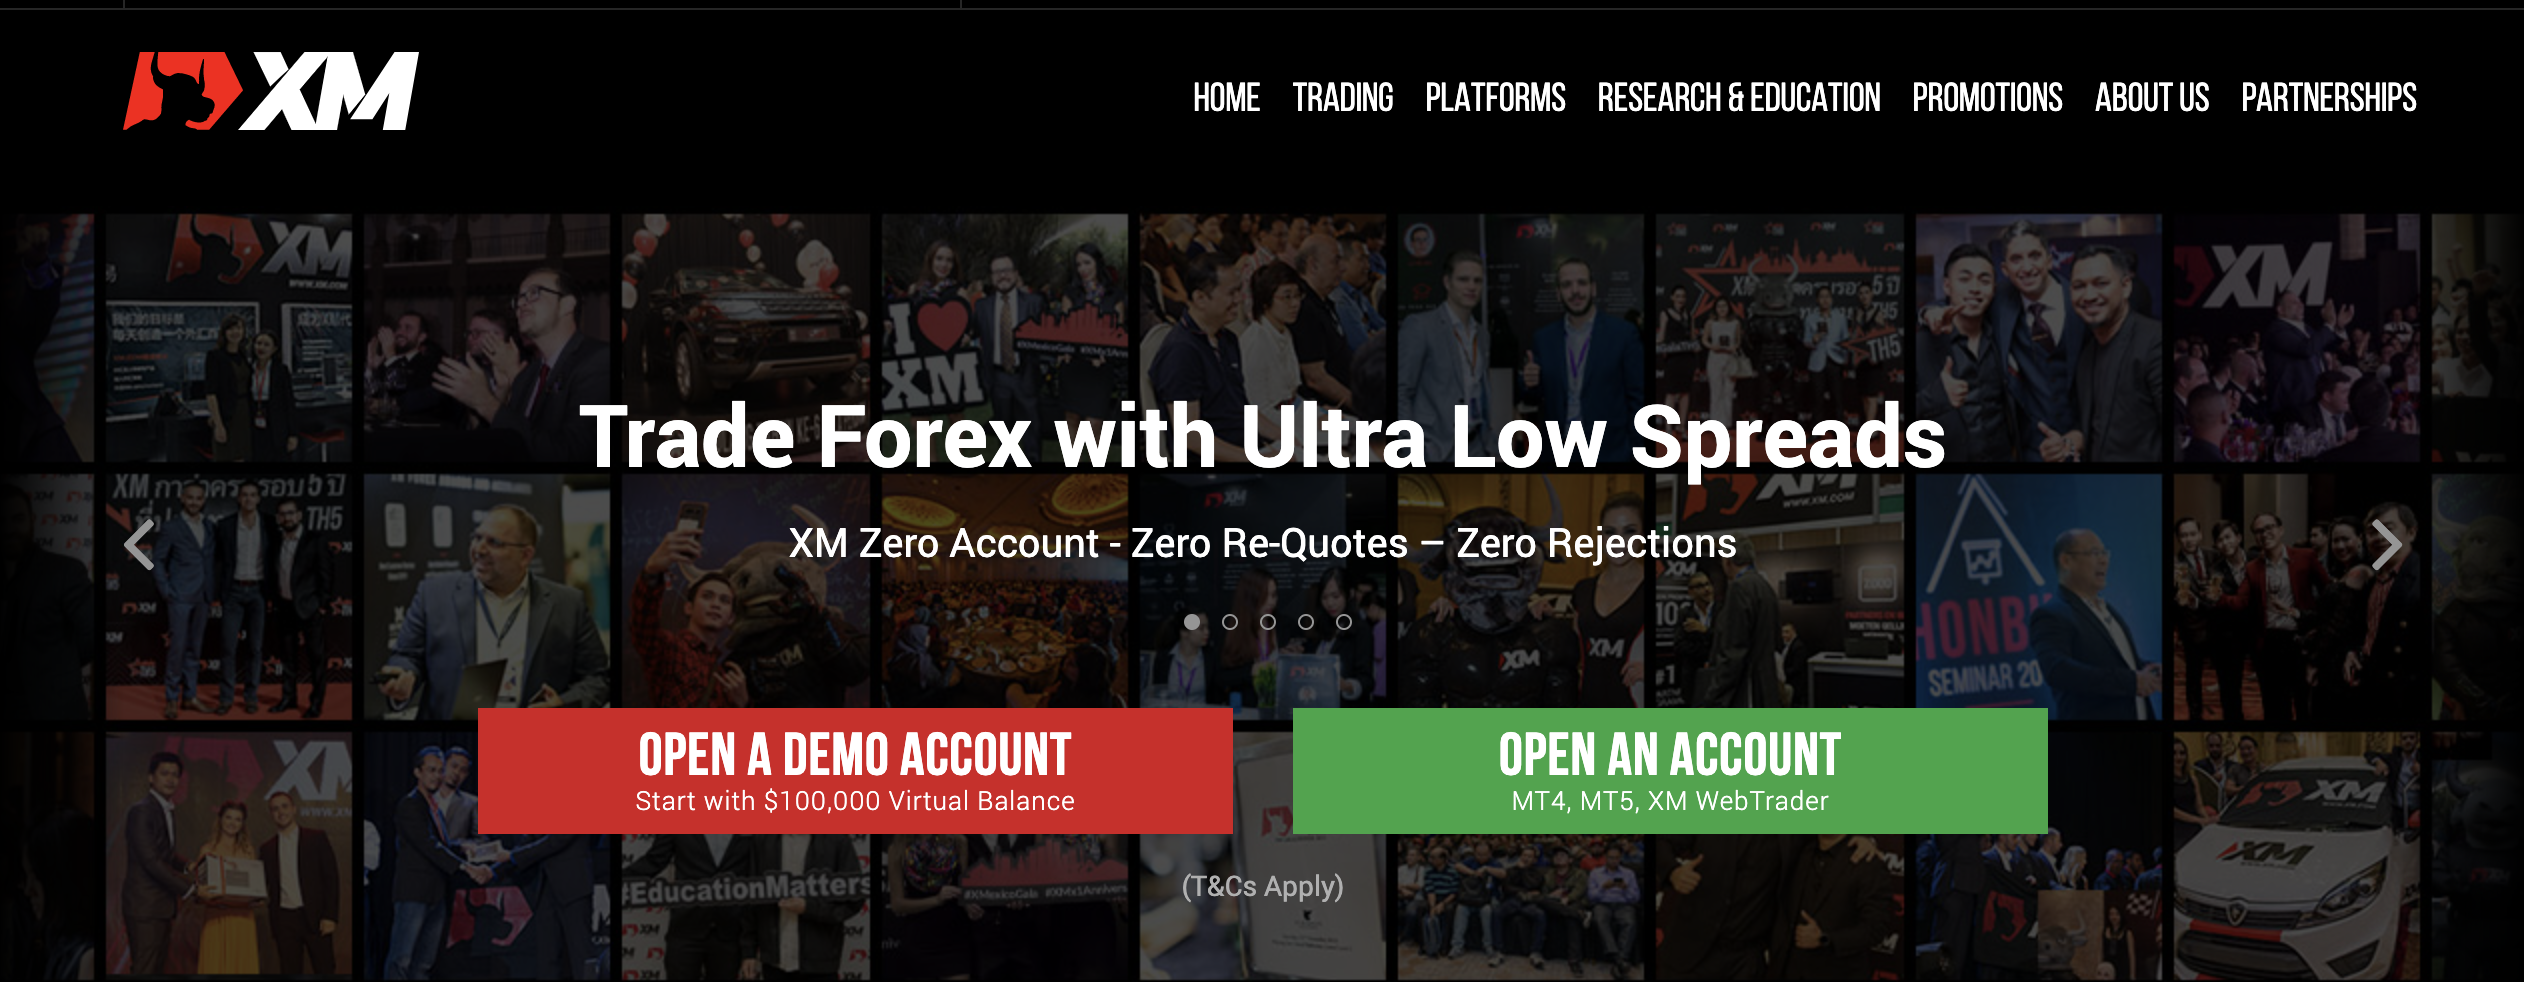 The official website of the forex broker XM